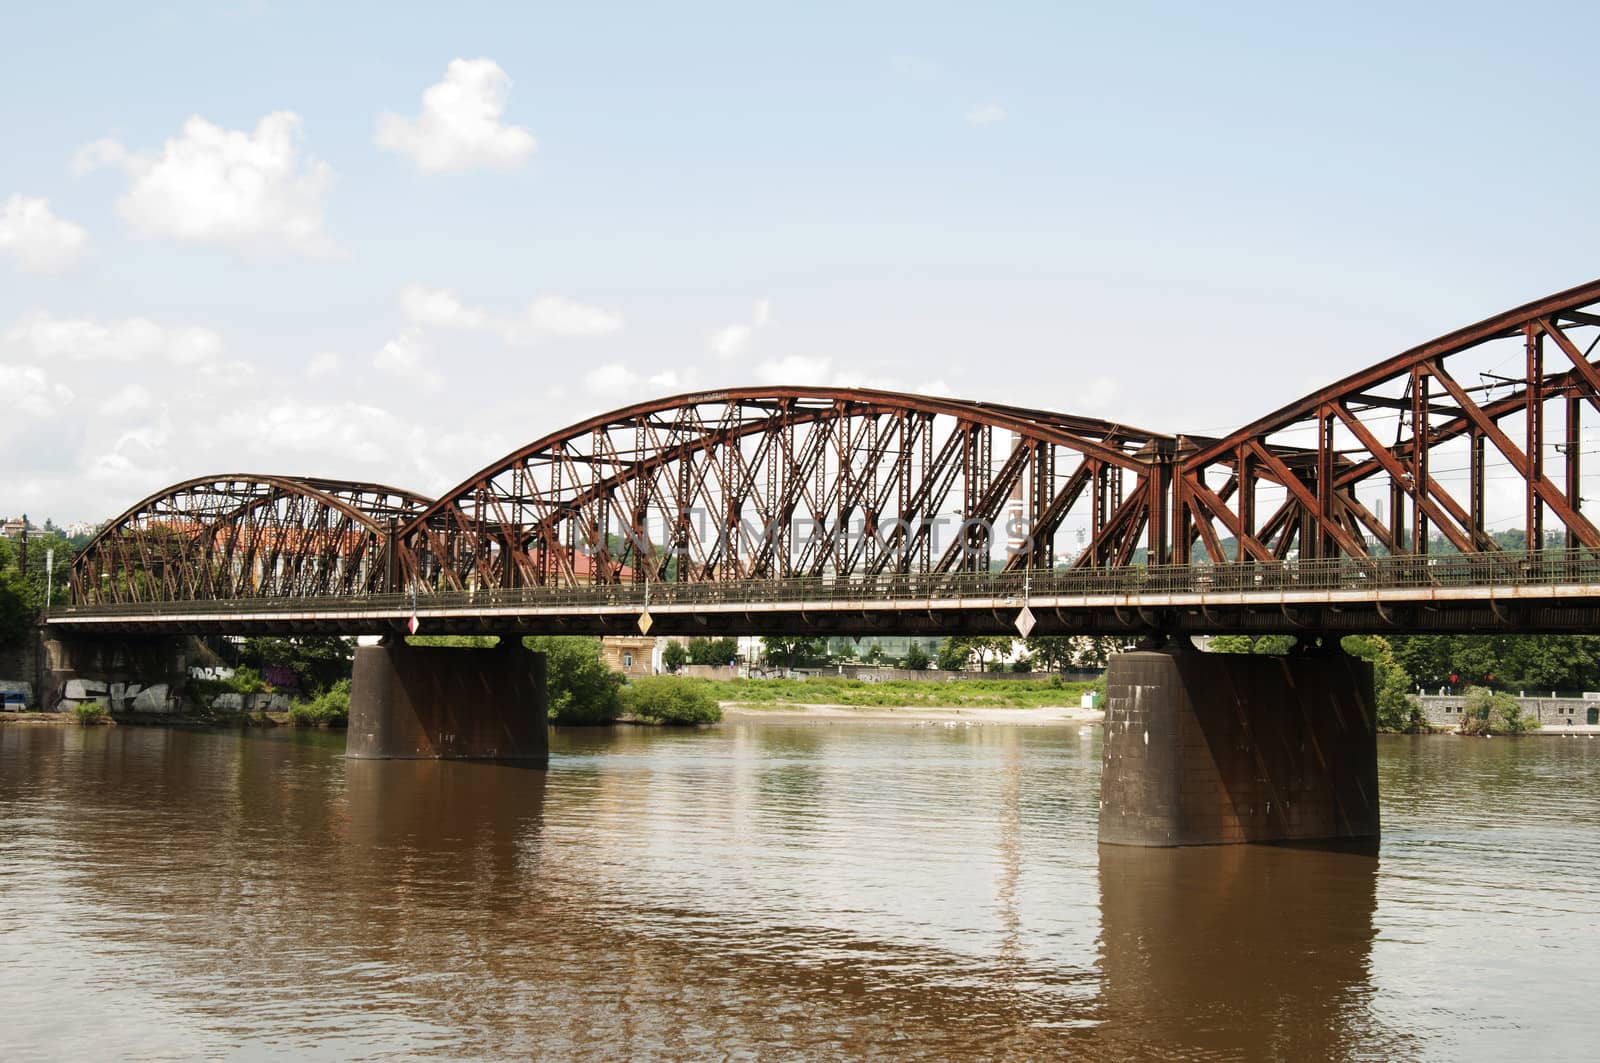 One of the determining structures of route of the Junction line, which connected the present Central station with Station of Smichov, was a railway bridge over the river of Vltava at Vyton. Its construction started in August 1870.